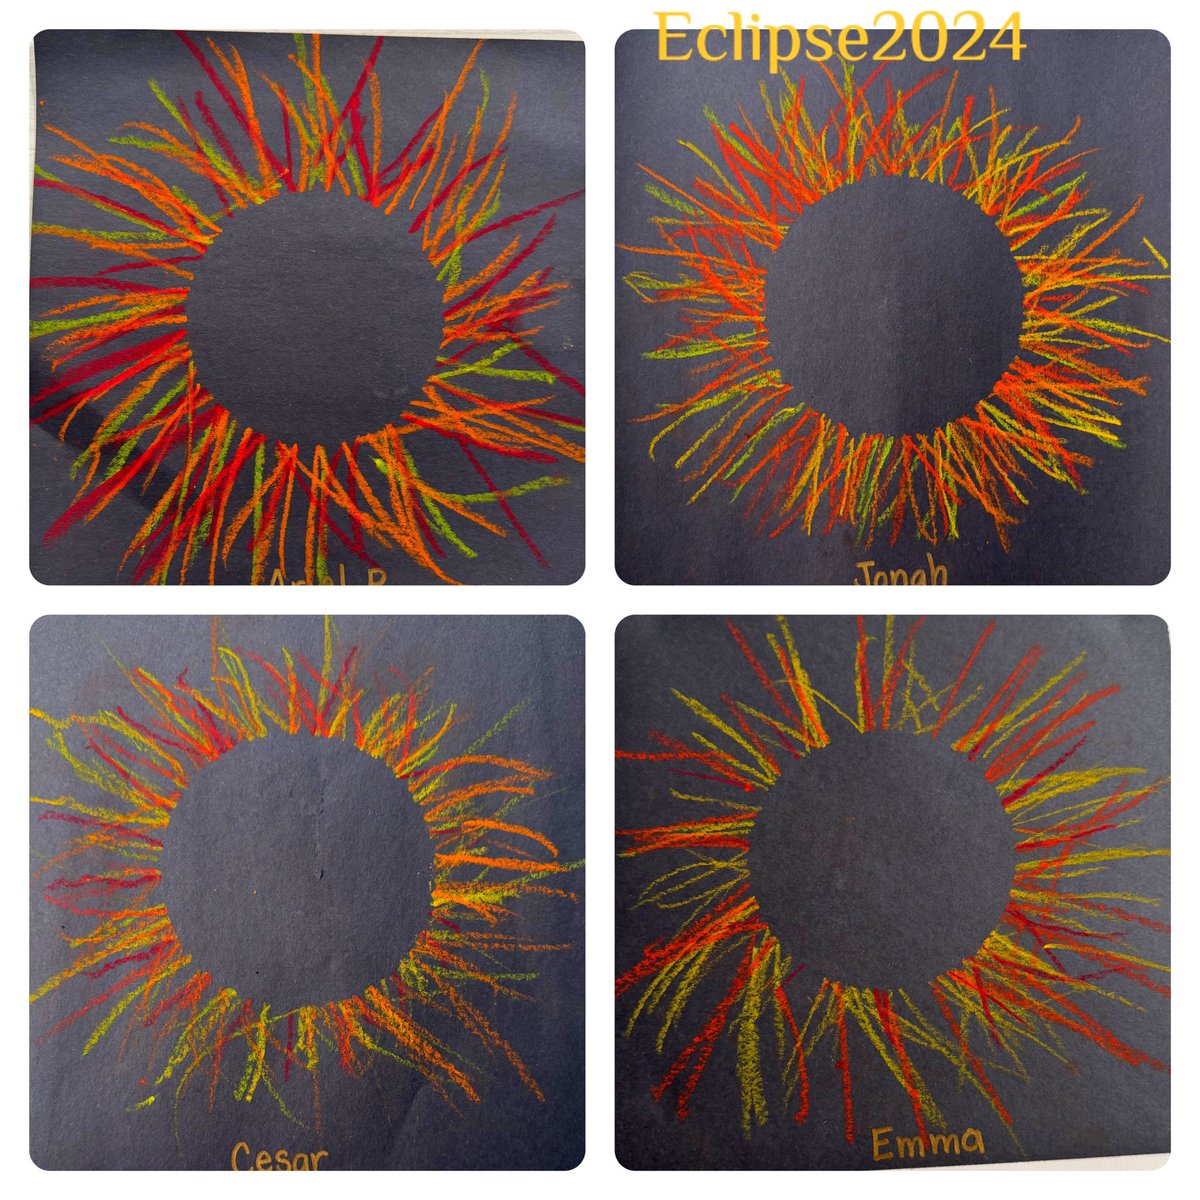 Yes, yesterday was a magical day of learning! I’m sure these TK Ss will remember #Eclipse2024. They will be 26 y-o next time it comes around USA. Today we reflected with some fun solar eclipse art. 🎨 #OilPastel